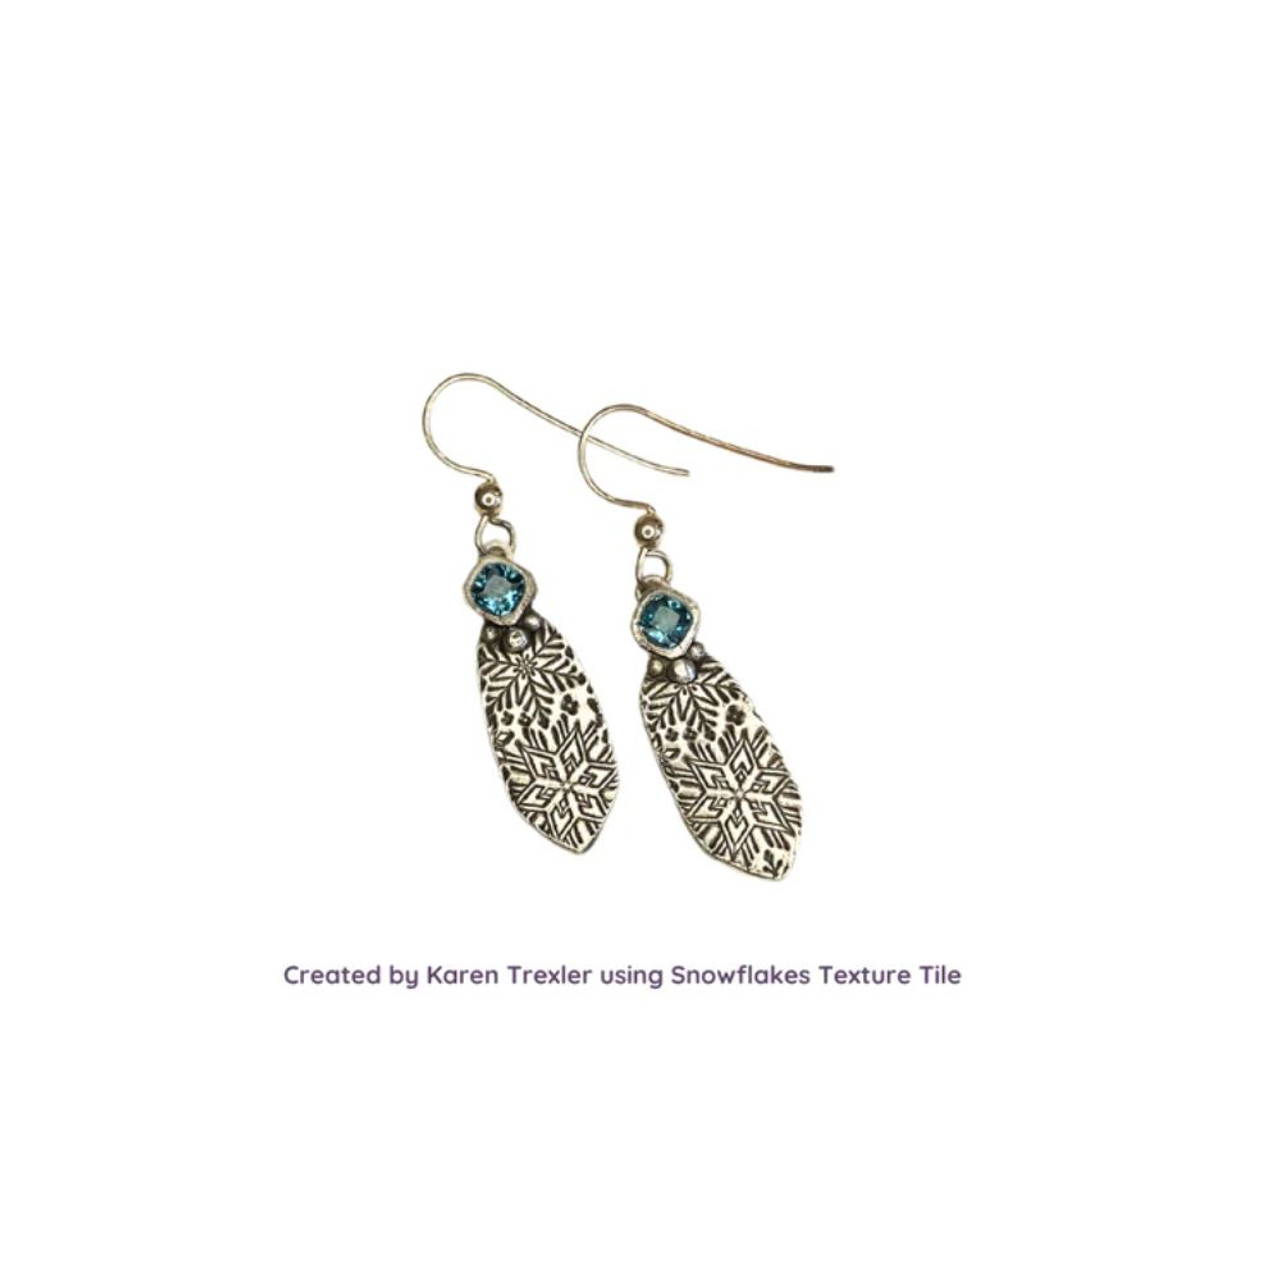 Earrings made with texture